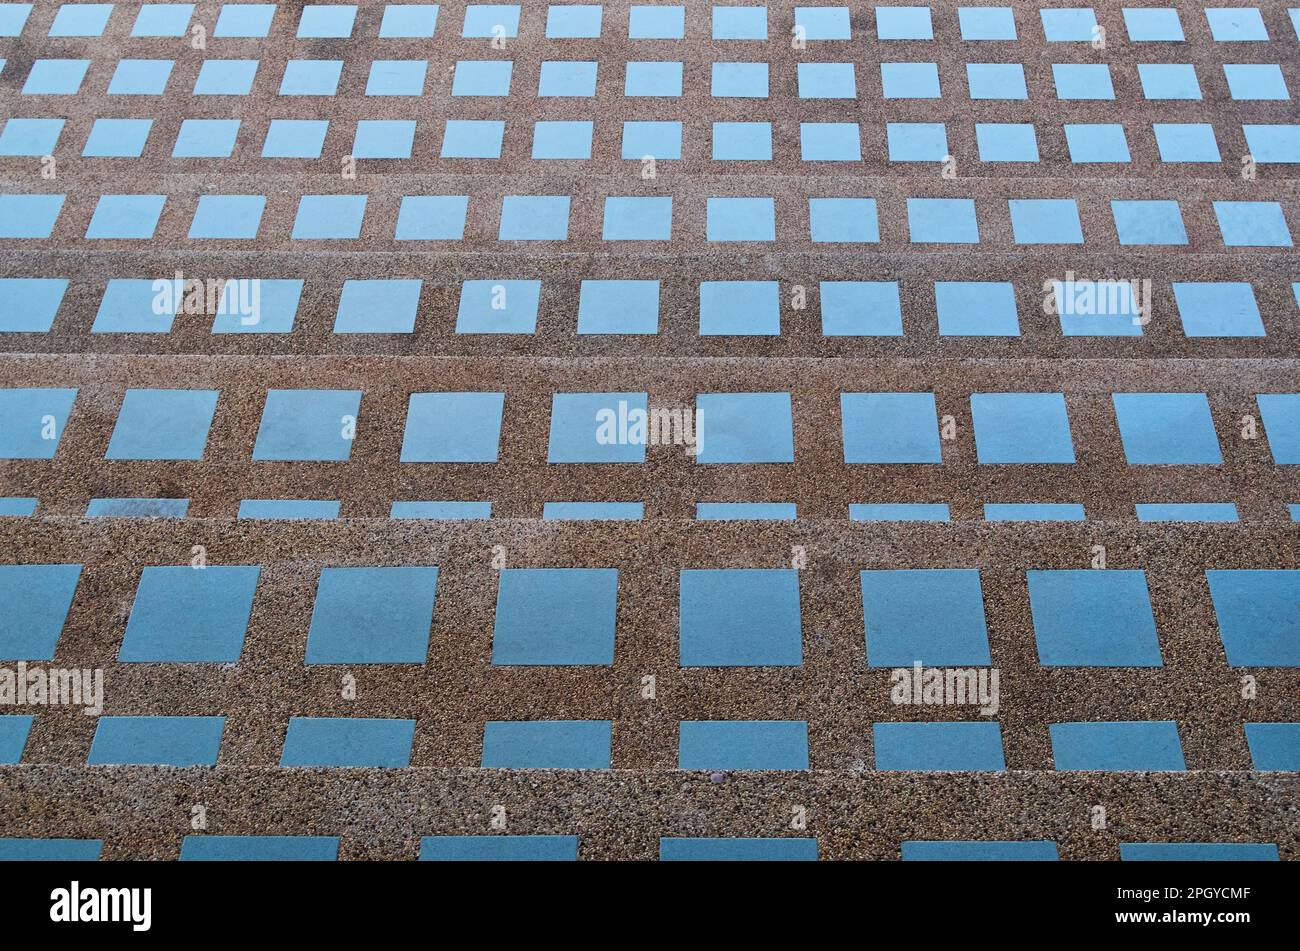 The geometry pattern of the tile floor Stock Photo